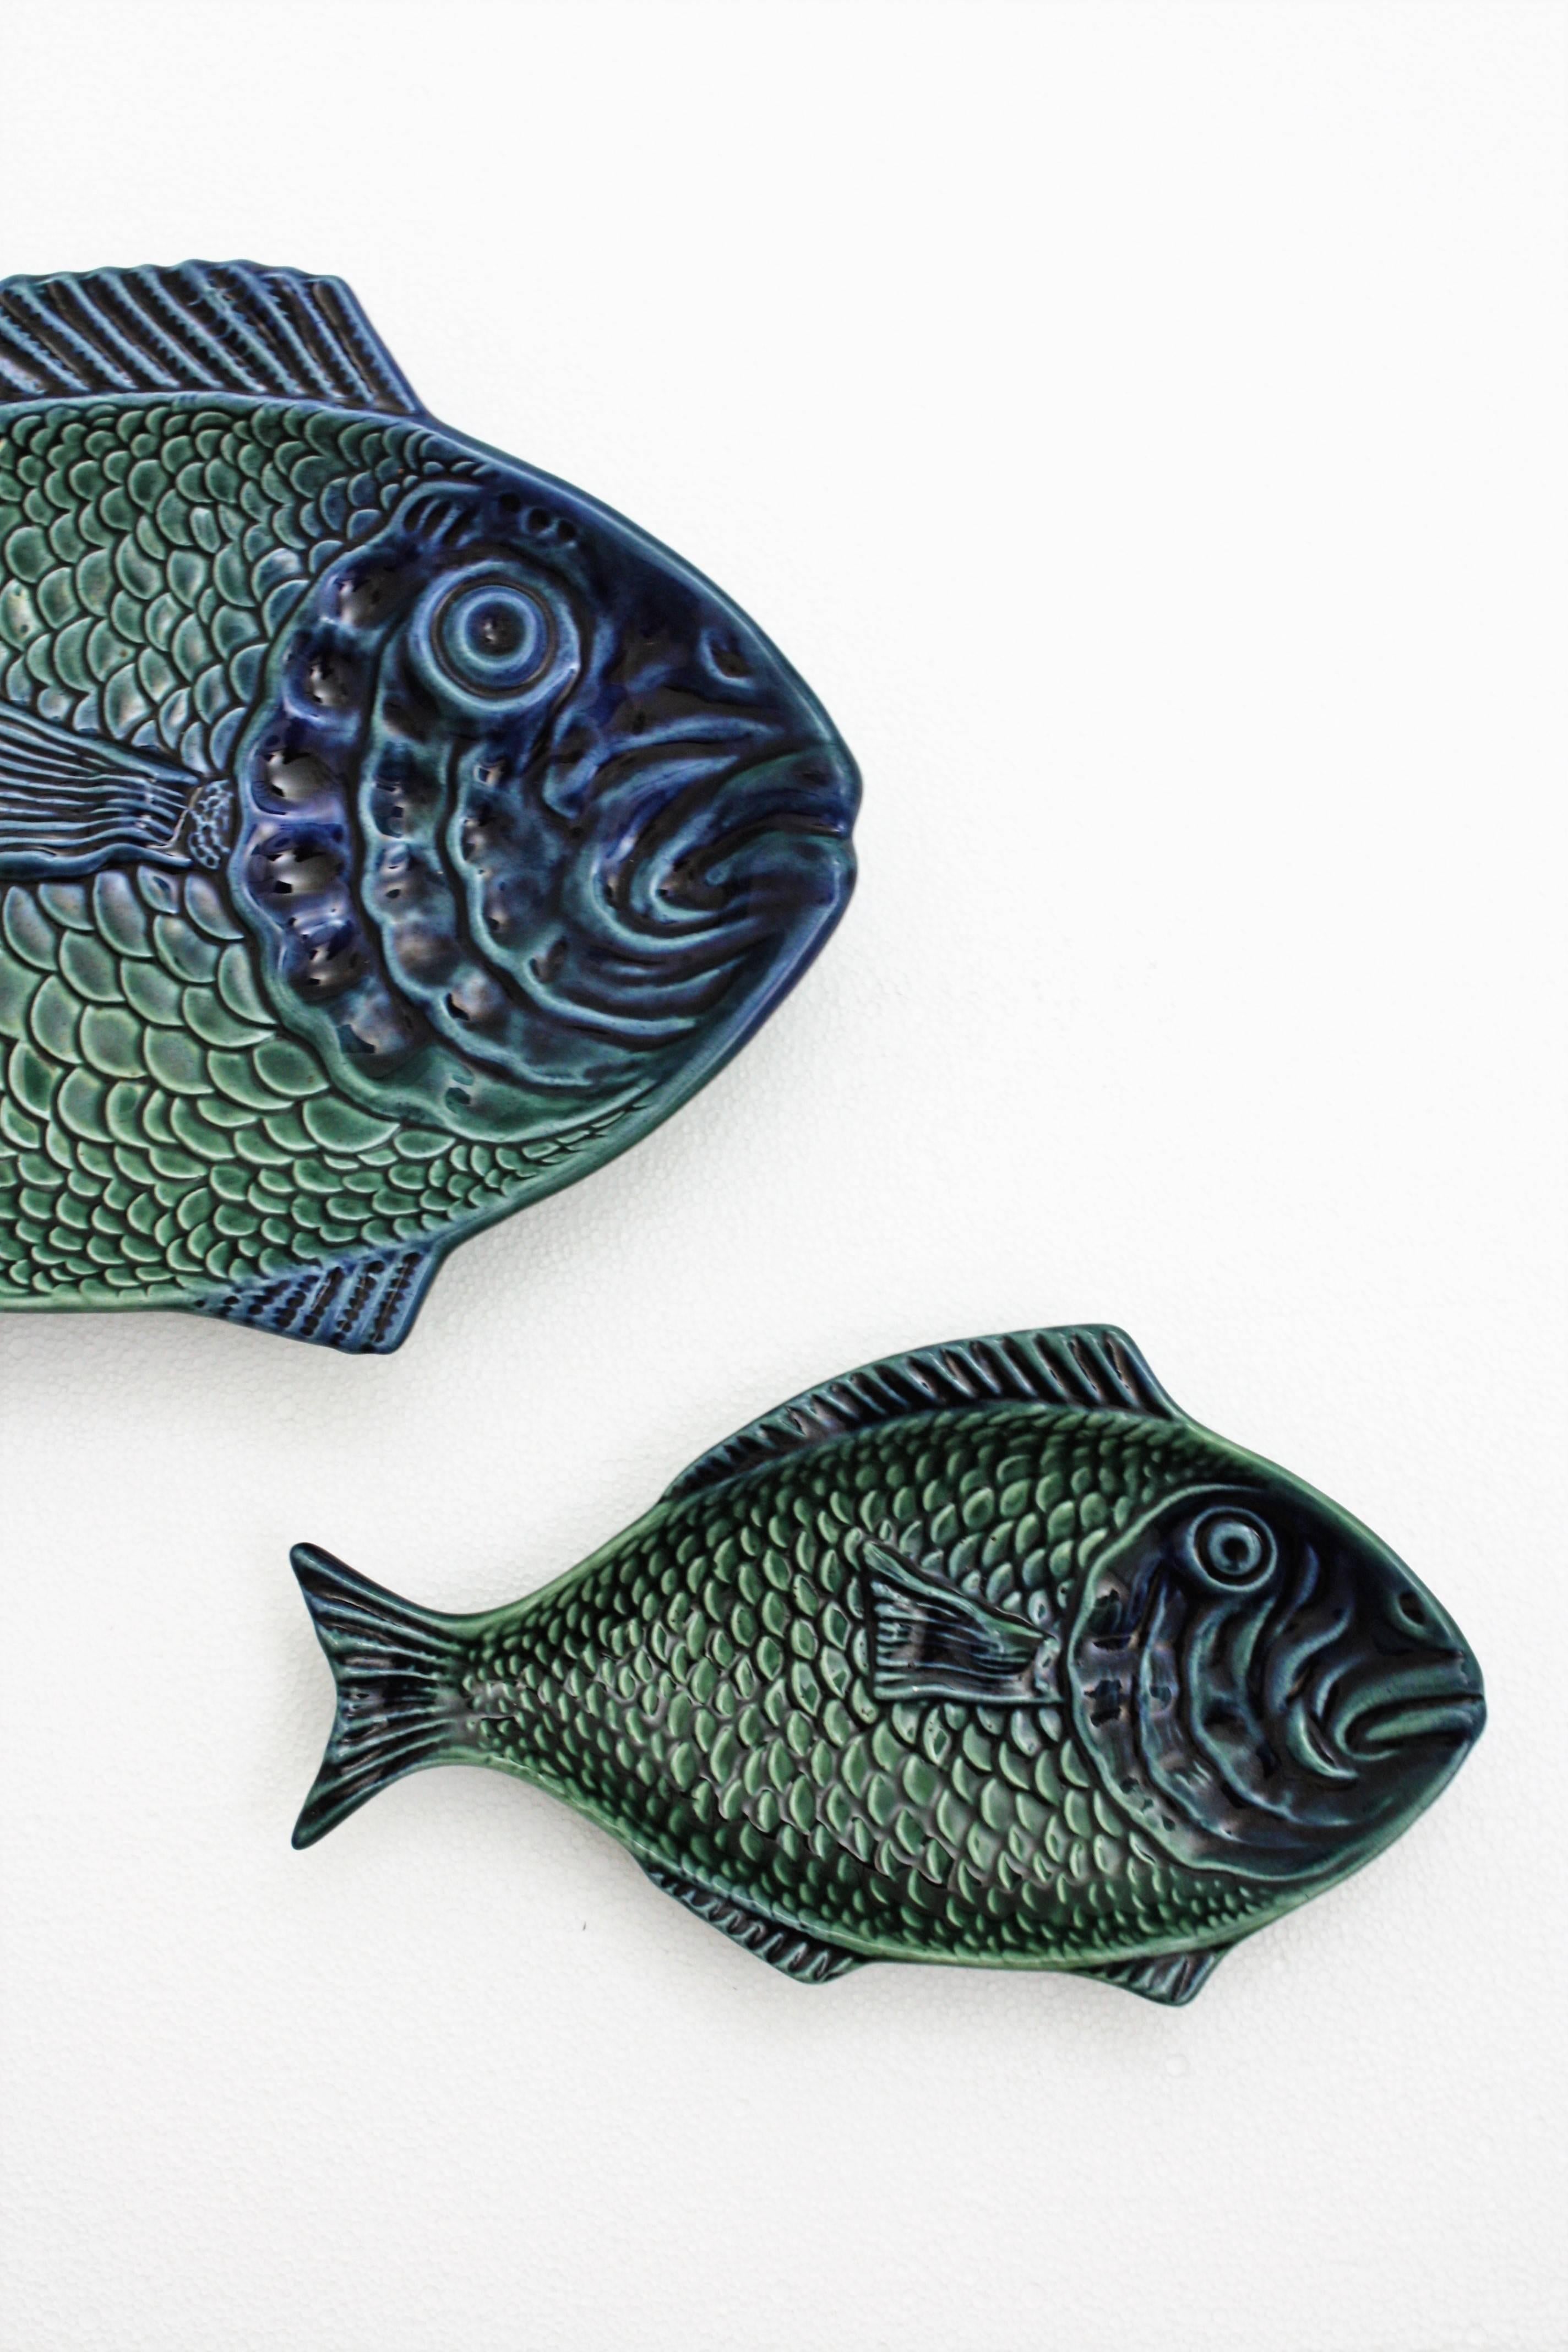 A lovely set of hand-painted glazed ceramic fish platters in green color with accents of blue in two sizes. The small one has the mark of the manufacturer at the back. Both of them are in excellent vintage condition.
Lovely to be used as serving